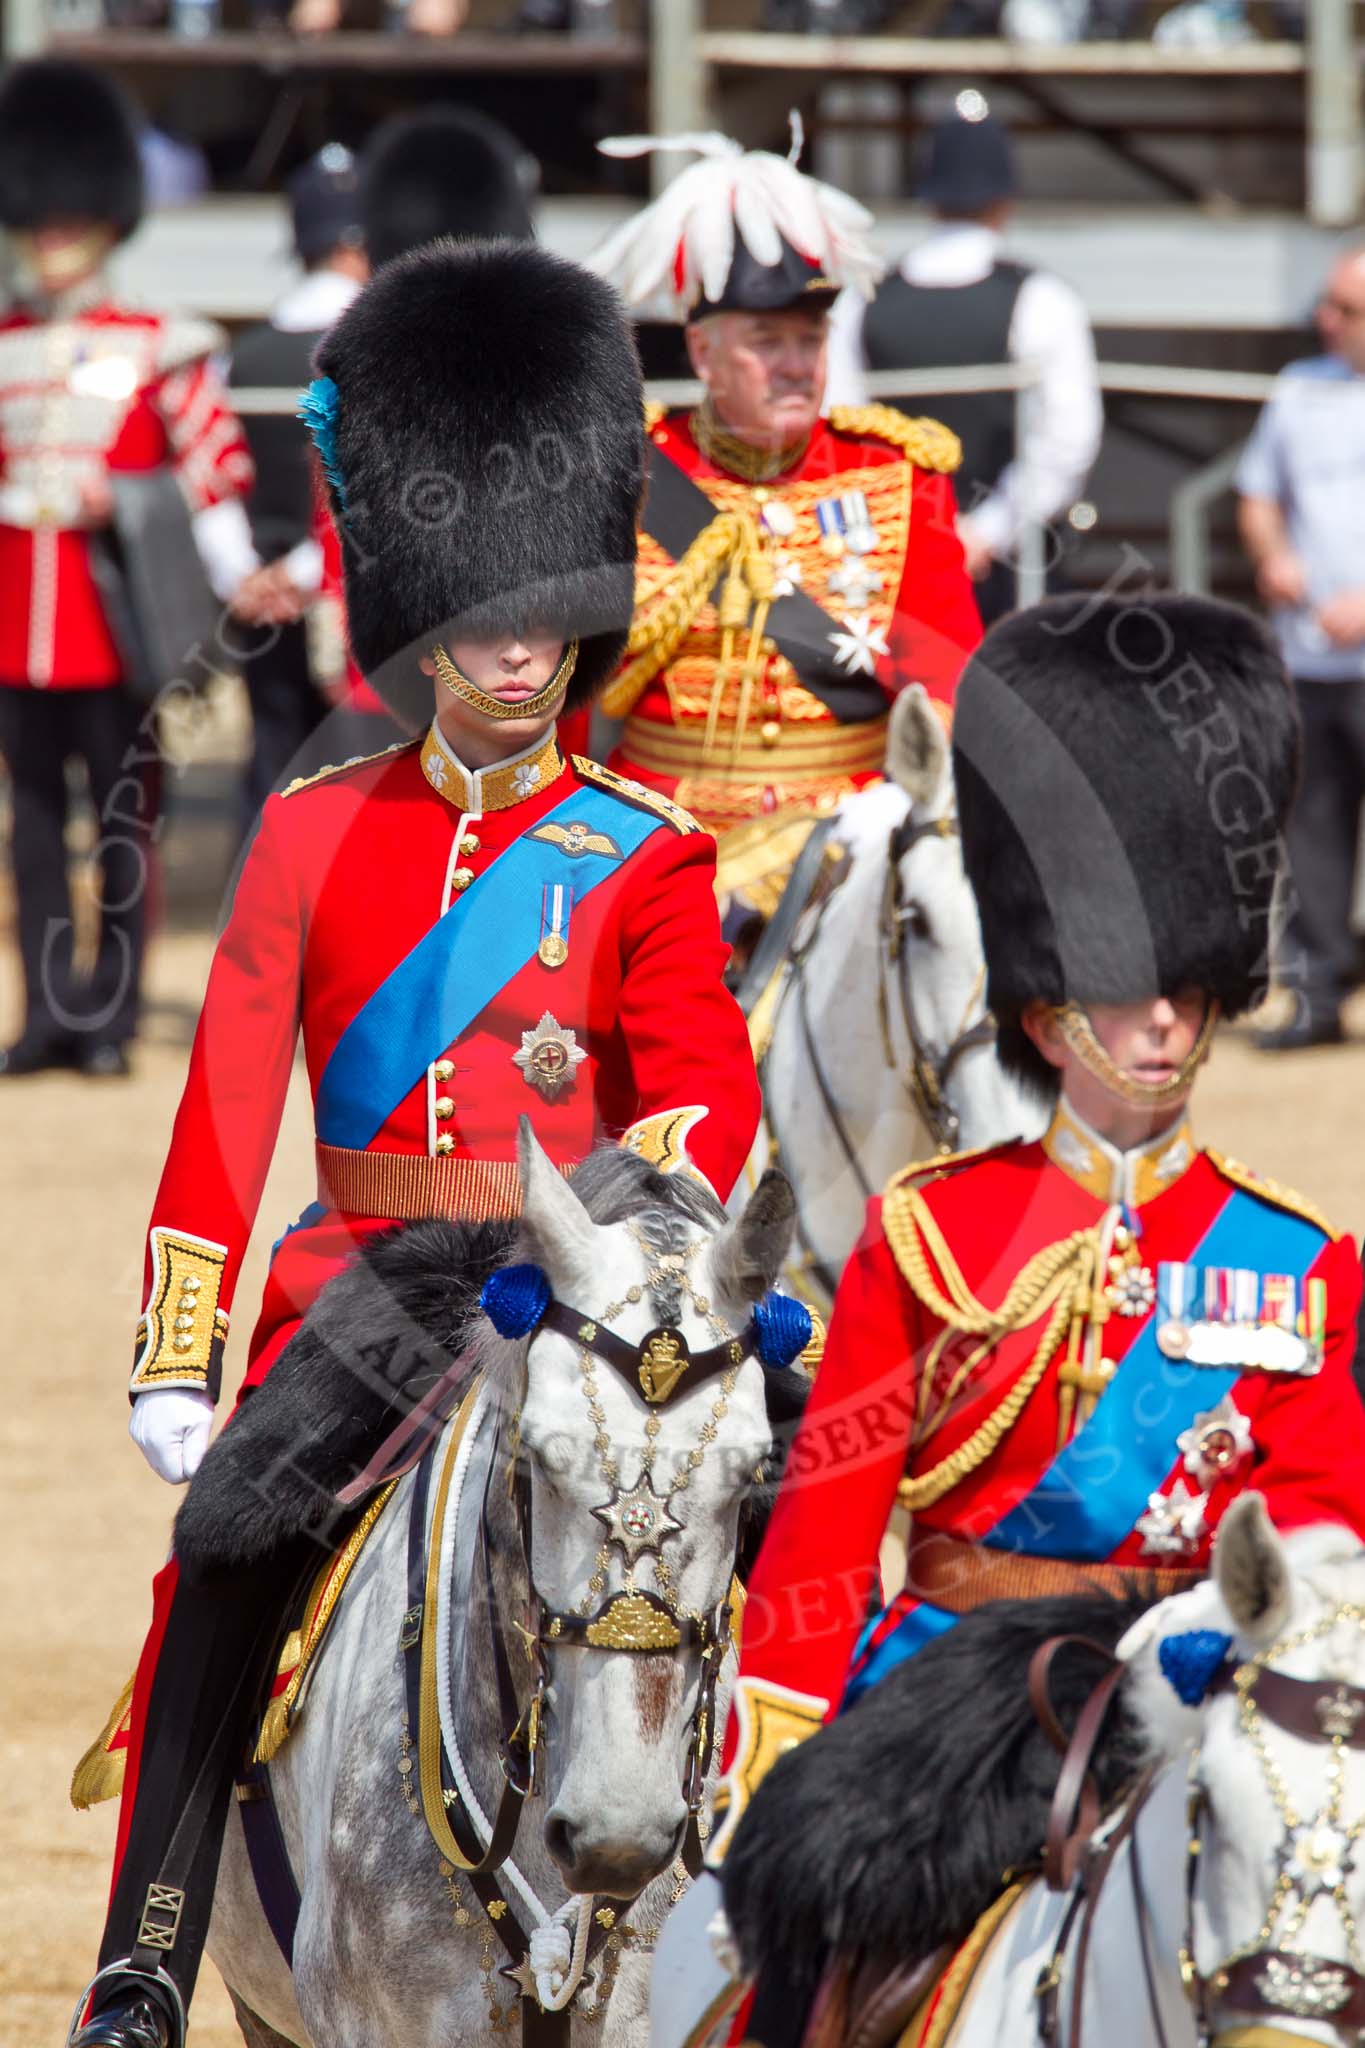 The Colonel's Review 2011: HRH Prince Edward, The Duke of Kent, Colonel Scots Guards. 'The Colonel's Review' is his review, behind him HRH Prince William, The Duke of Cambridge, and the Master of the Horse, The Lord Vestey..
Horse Guards Parade, Westminster,
London SW1,

United Kingdom,
on 04 June 2011 at 10:59, image #79